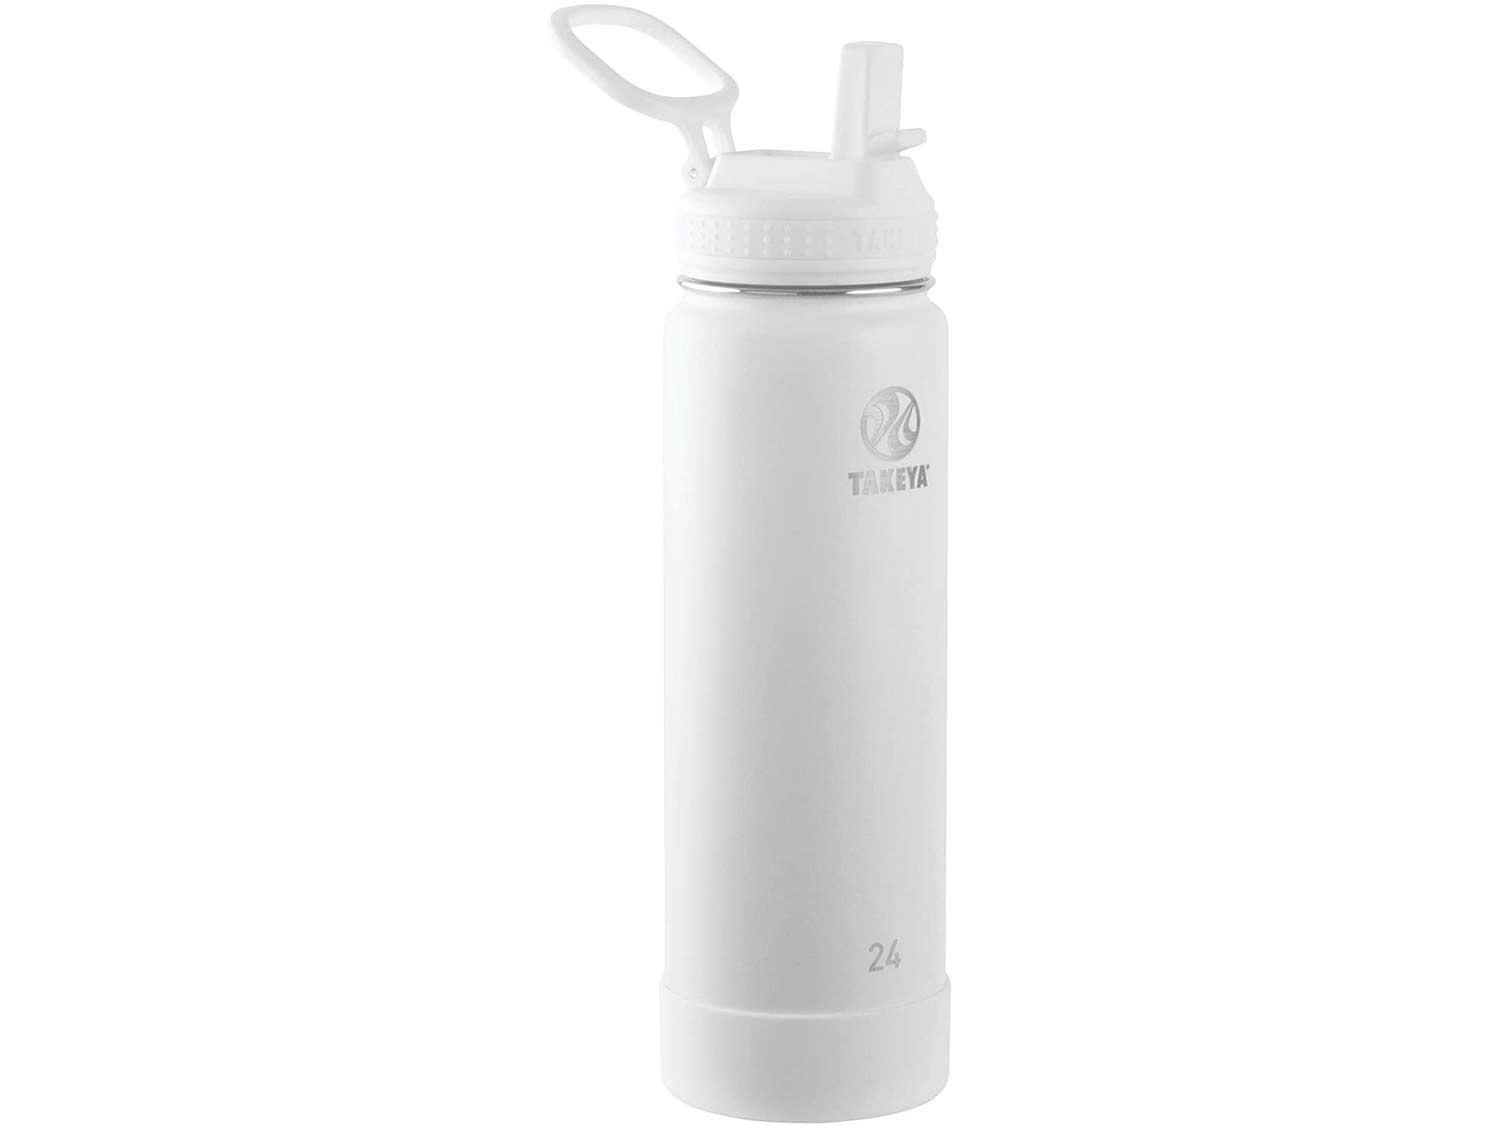 Takeya Actives Insulated Stainless Steel Water Bottle with Straw Lid